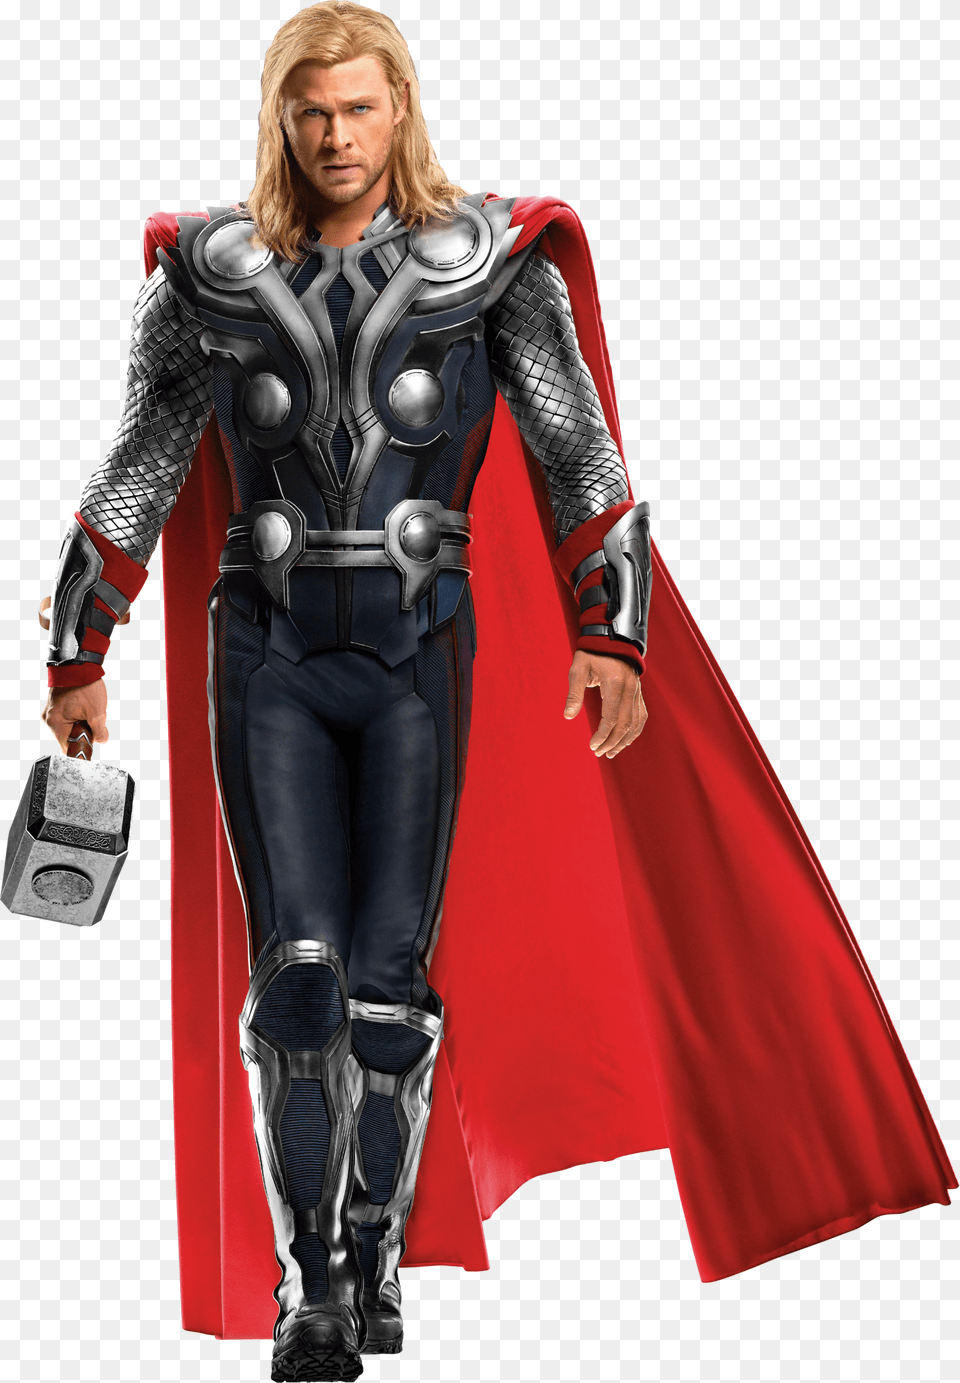 Thor Avengers Photo Fh Marvel Avengers Age Of Ultron Thor Odinson Cosplay, Adult, Cape, Clothing, Costume Png Image